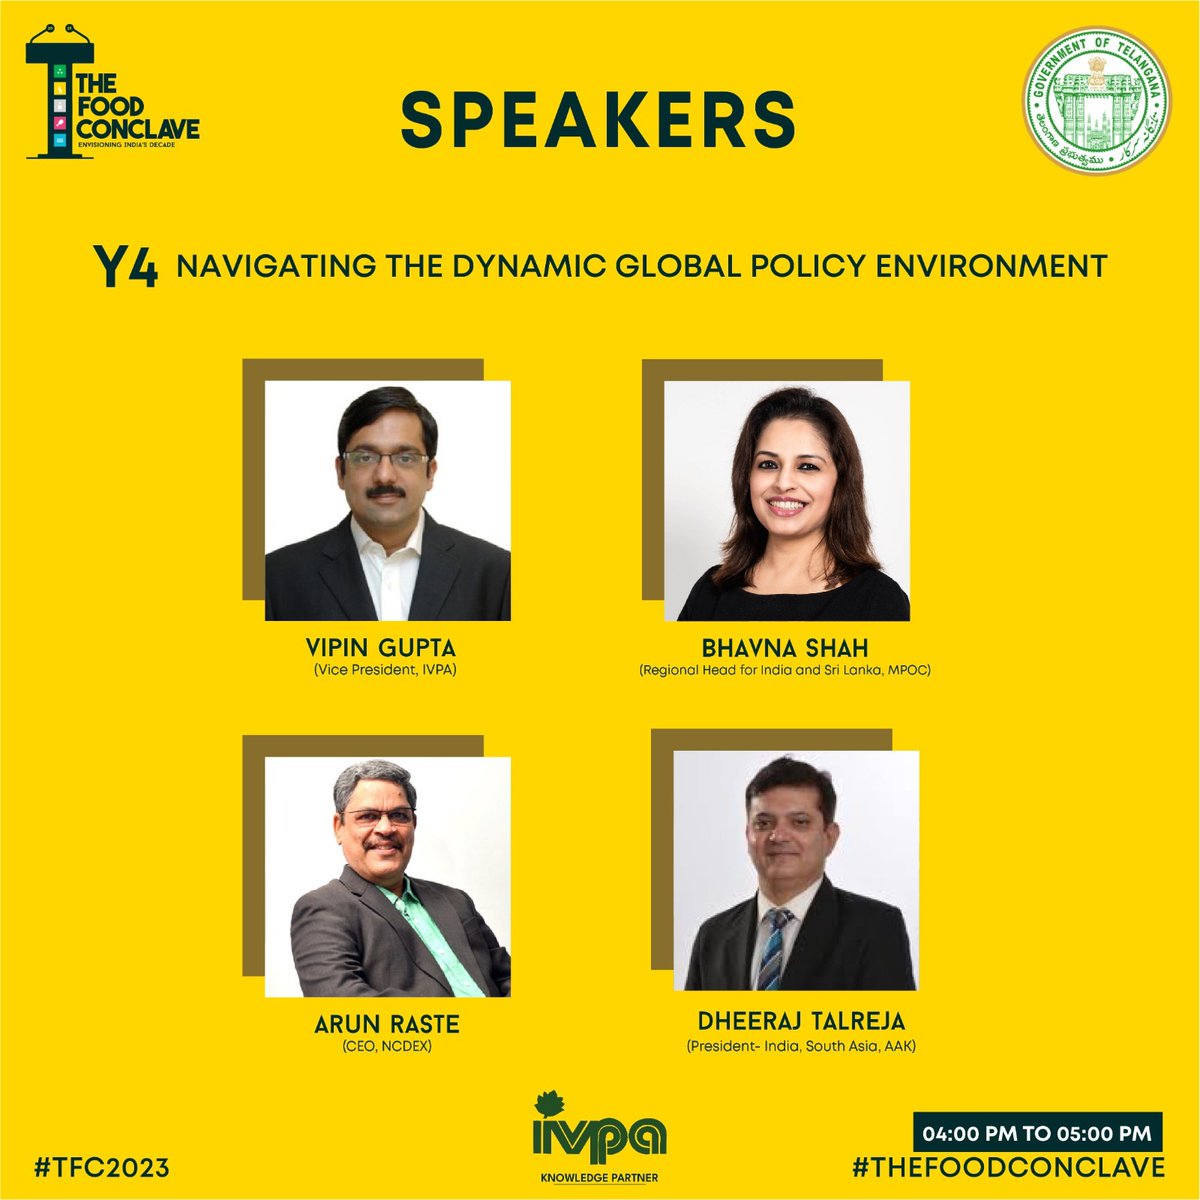 Exciting news! Get ready to explore the dynamic #global policy environment in the #Edibleoil industry with our expert panelists at #TheFoodConclave.
To join us, register here
thefoodconclave.com/registration-f…

#TFC2023 #TheFoodconclave #FoodProcessing #TheFoodConclaveHyderabad #Edibleoils